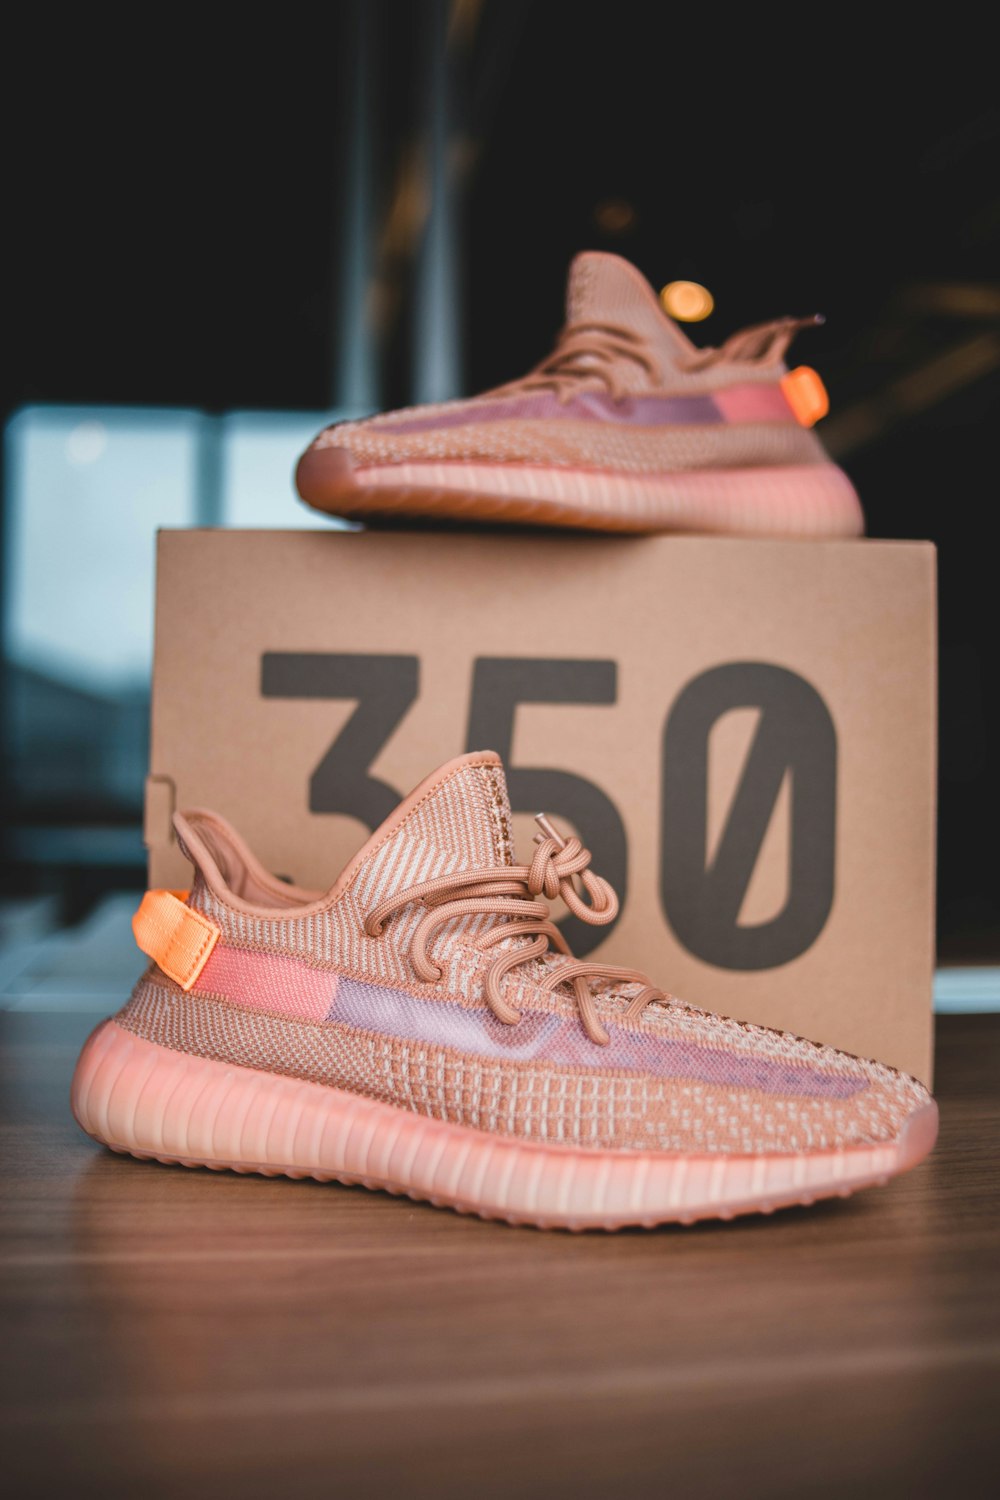 pair of pink Adidas Yeezy Boost 350 on brown wooden surface photo – Free  Shoe Image on Unsplash